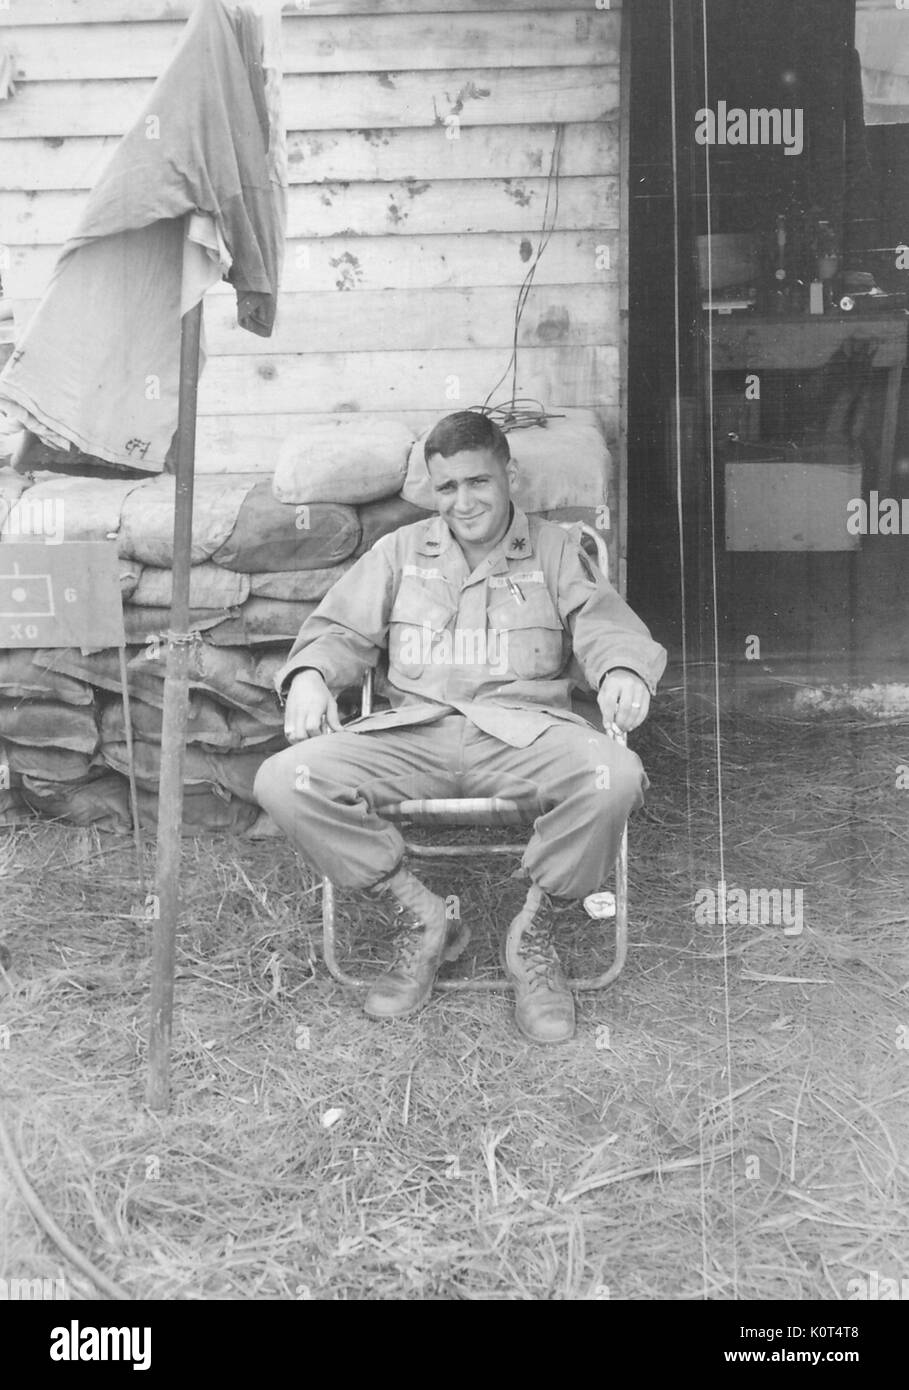 A United States Army serviceman relaxing in a lawn chair, he is smoking a cigarette near the entrance to a wooden building where equipment is visible spread out on a table, Thailand, 1967. Stock Photo